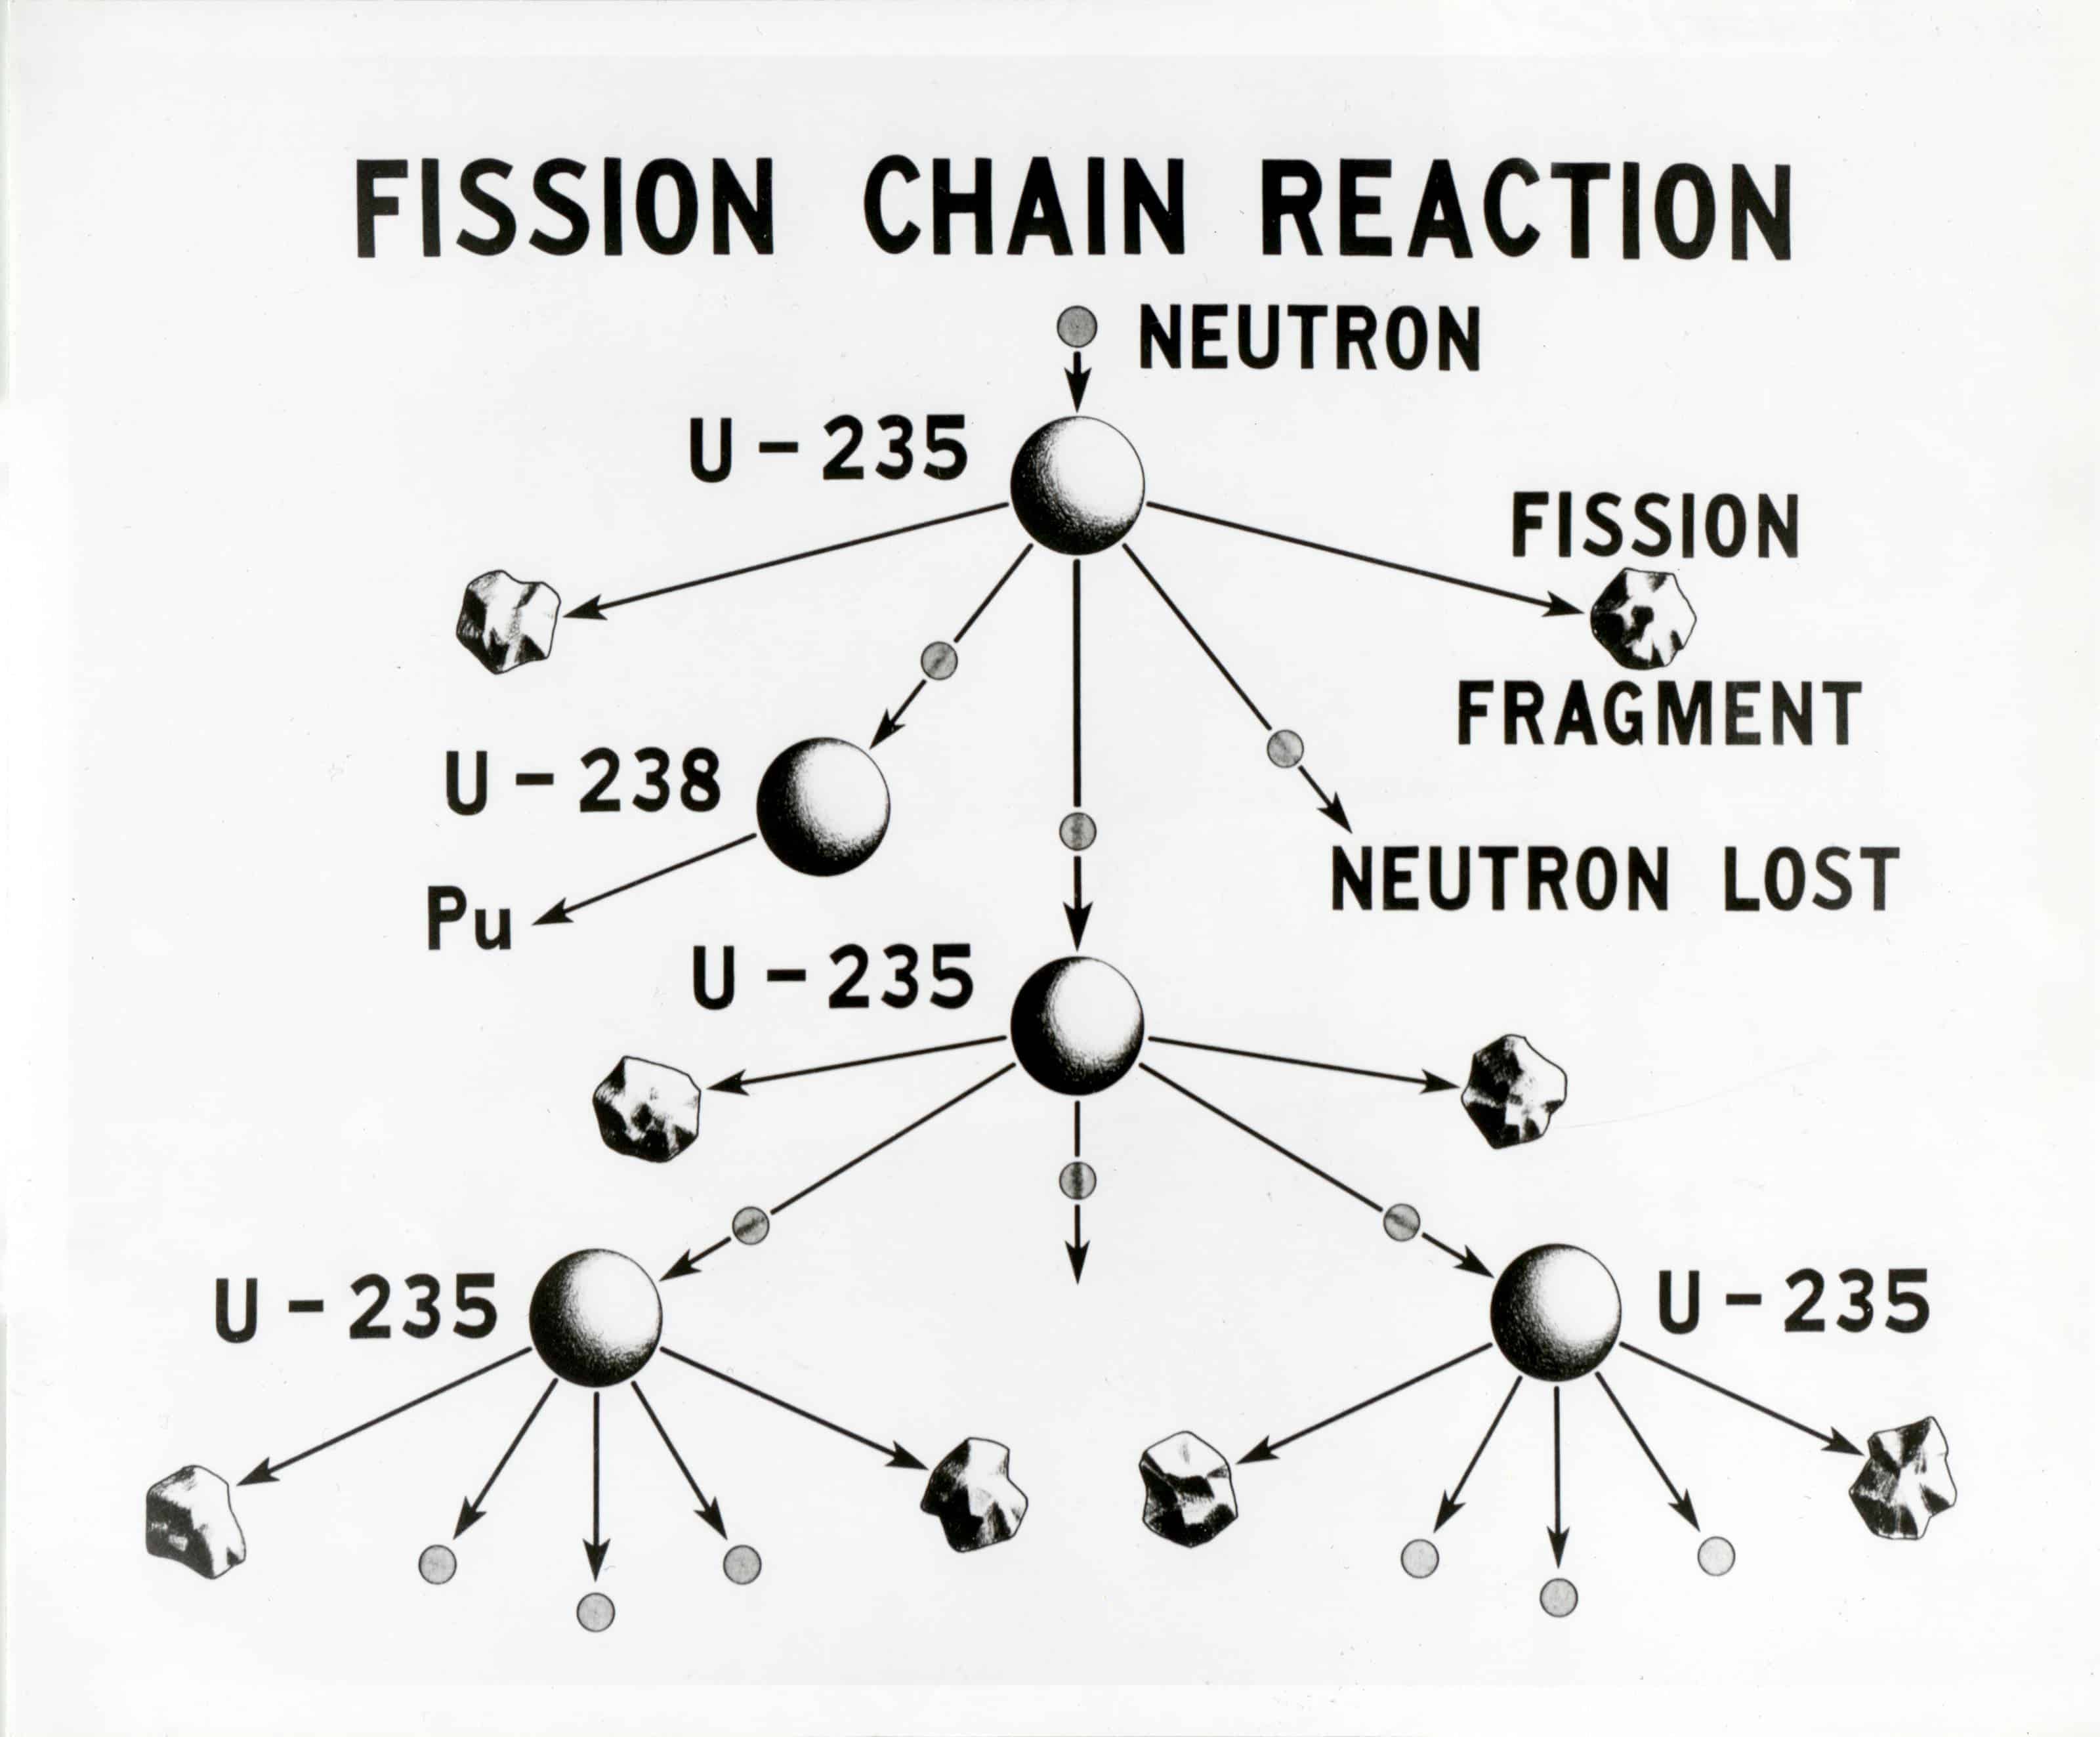 which change occurs during a nuclear fission reaction